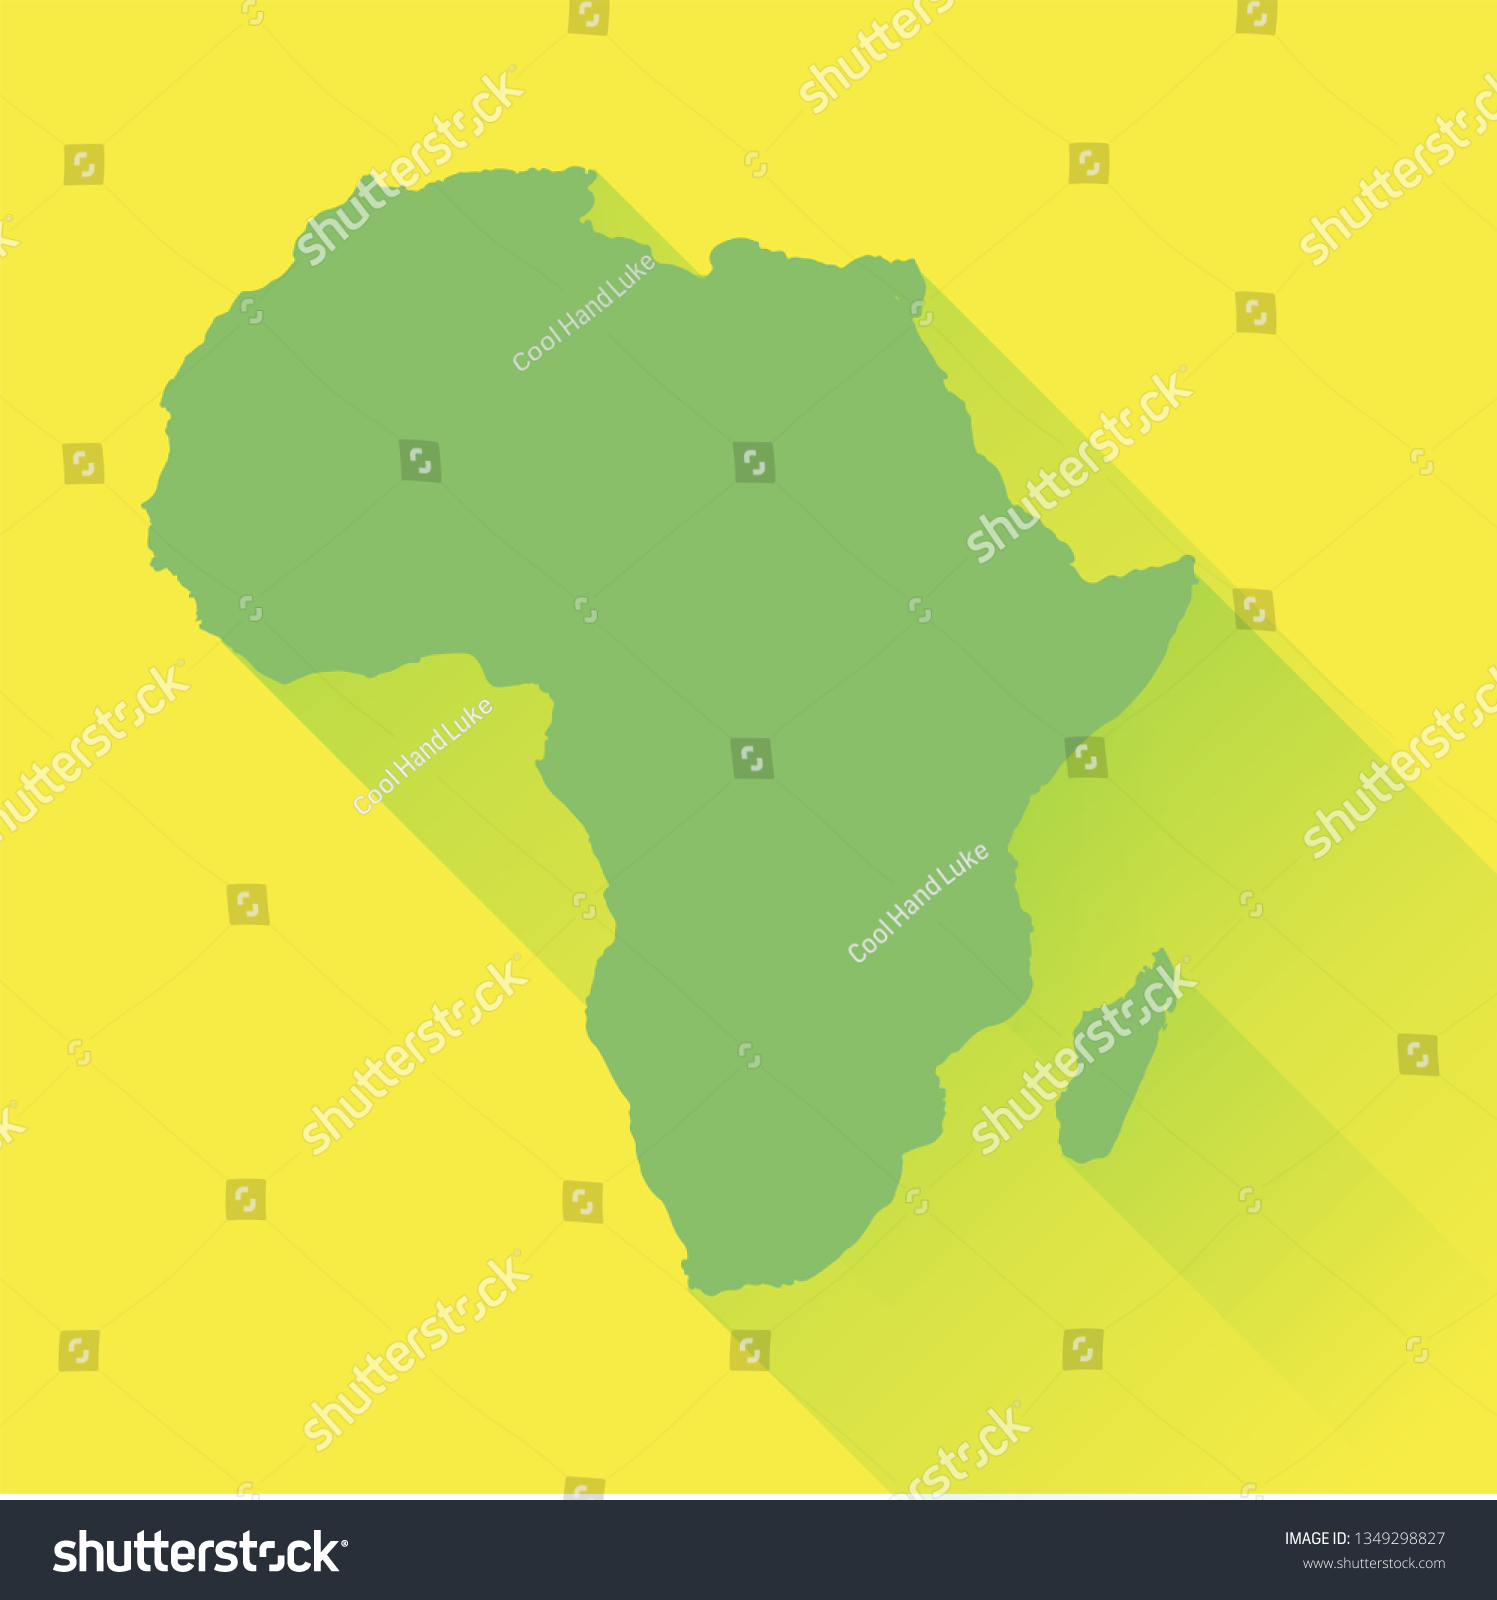 Africa Political Map Of Africa With A Stylish Royalty Free Stock Vector 1349298827 0827